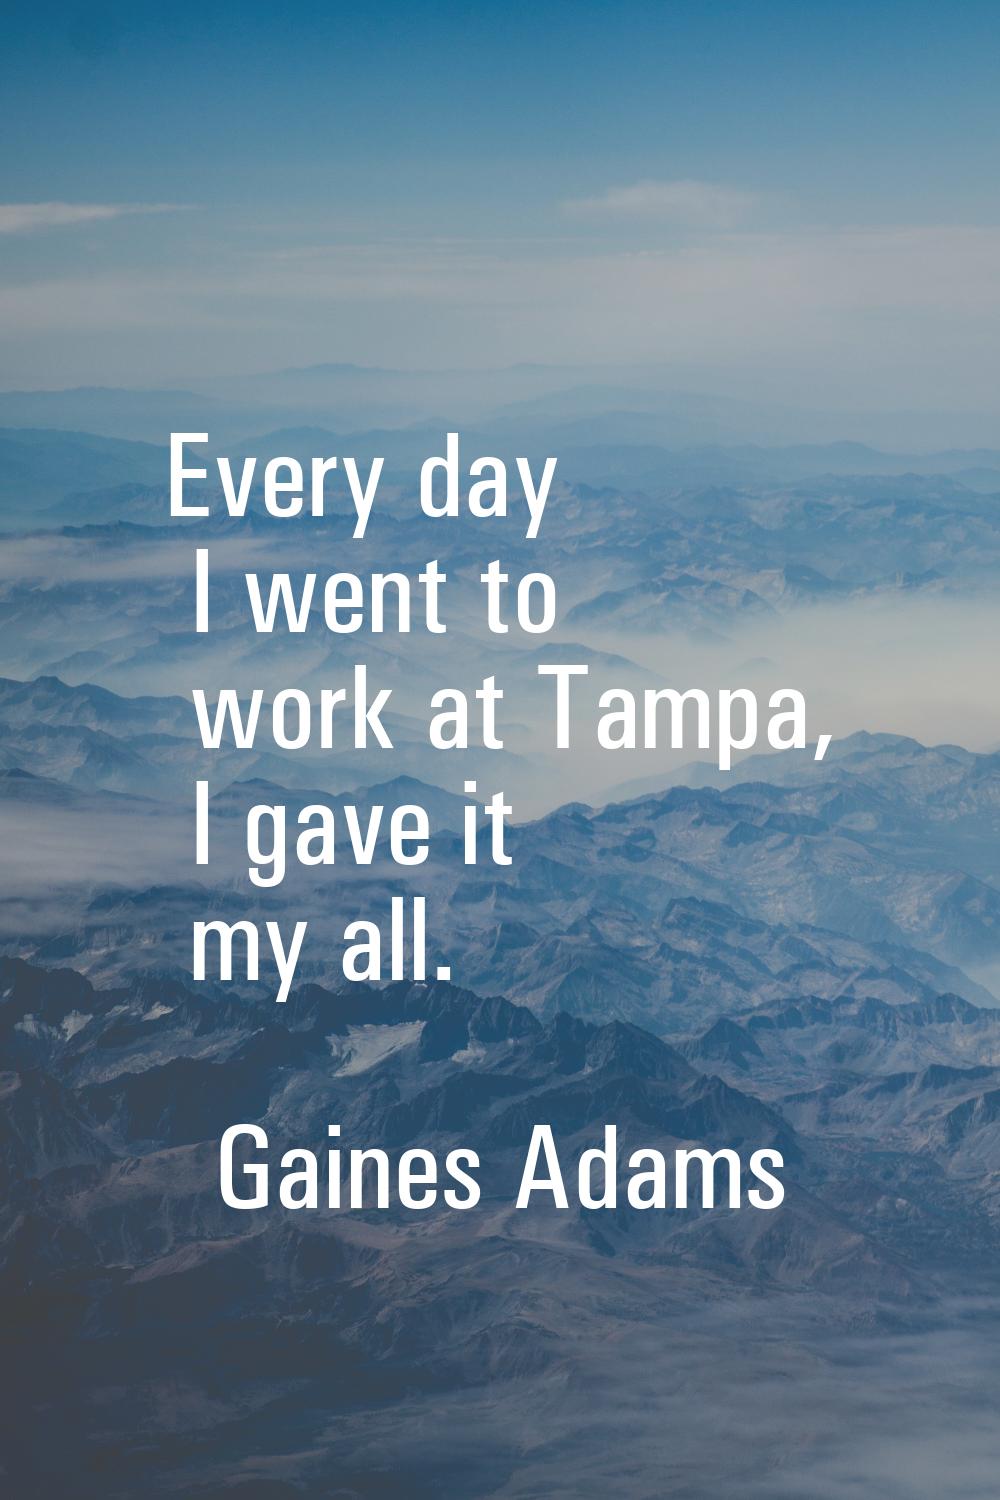 Every day I went to work at Tampa, I gave it my all.